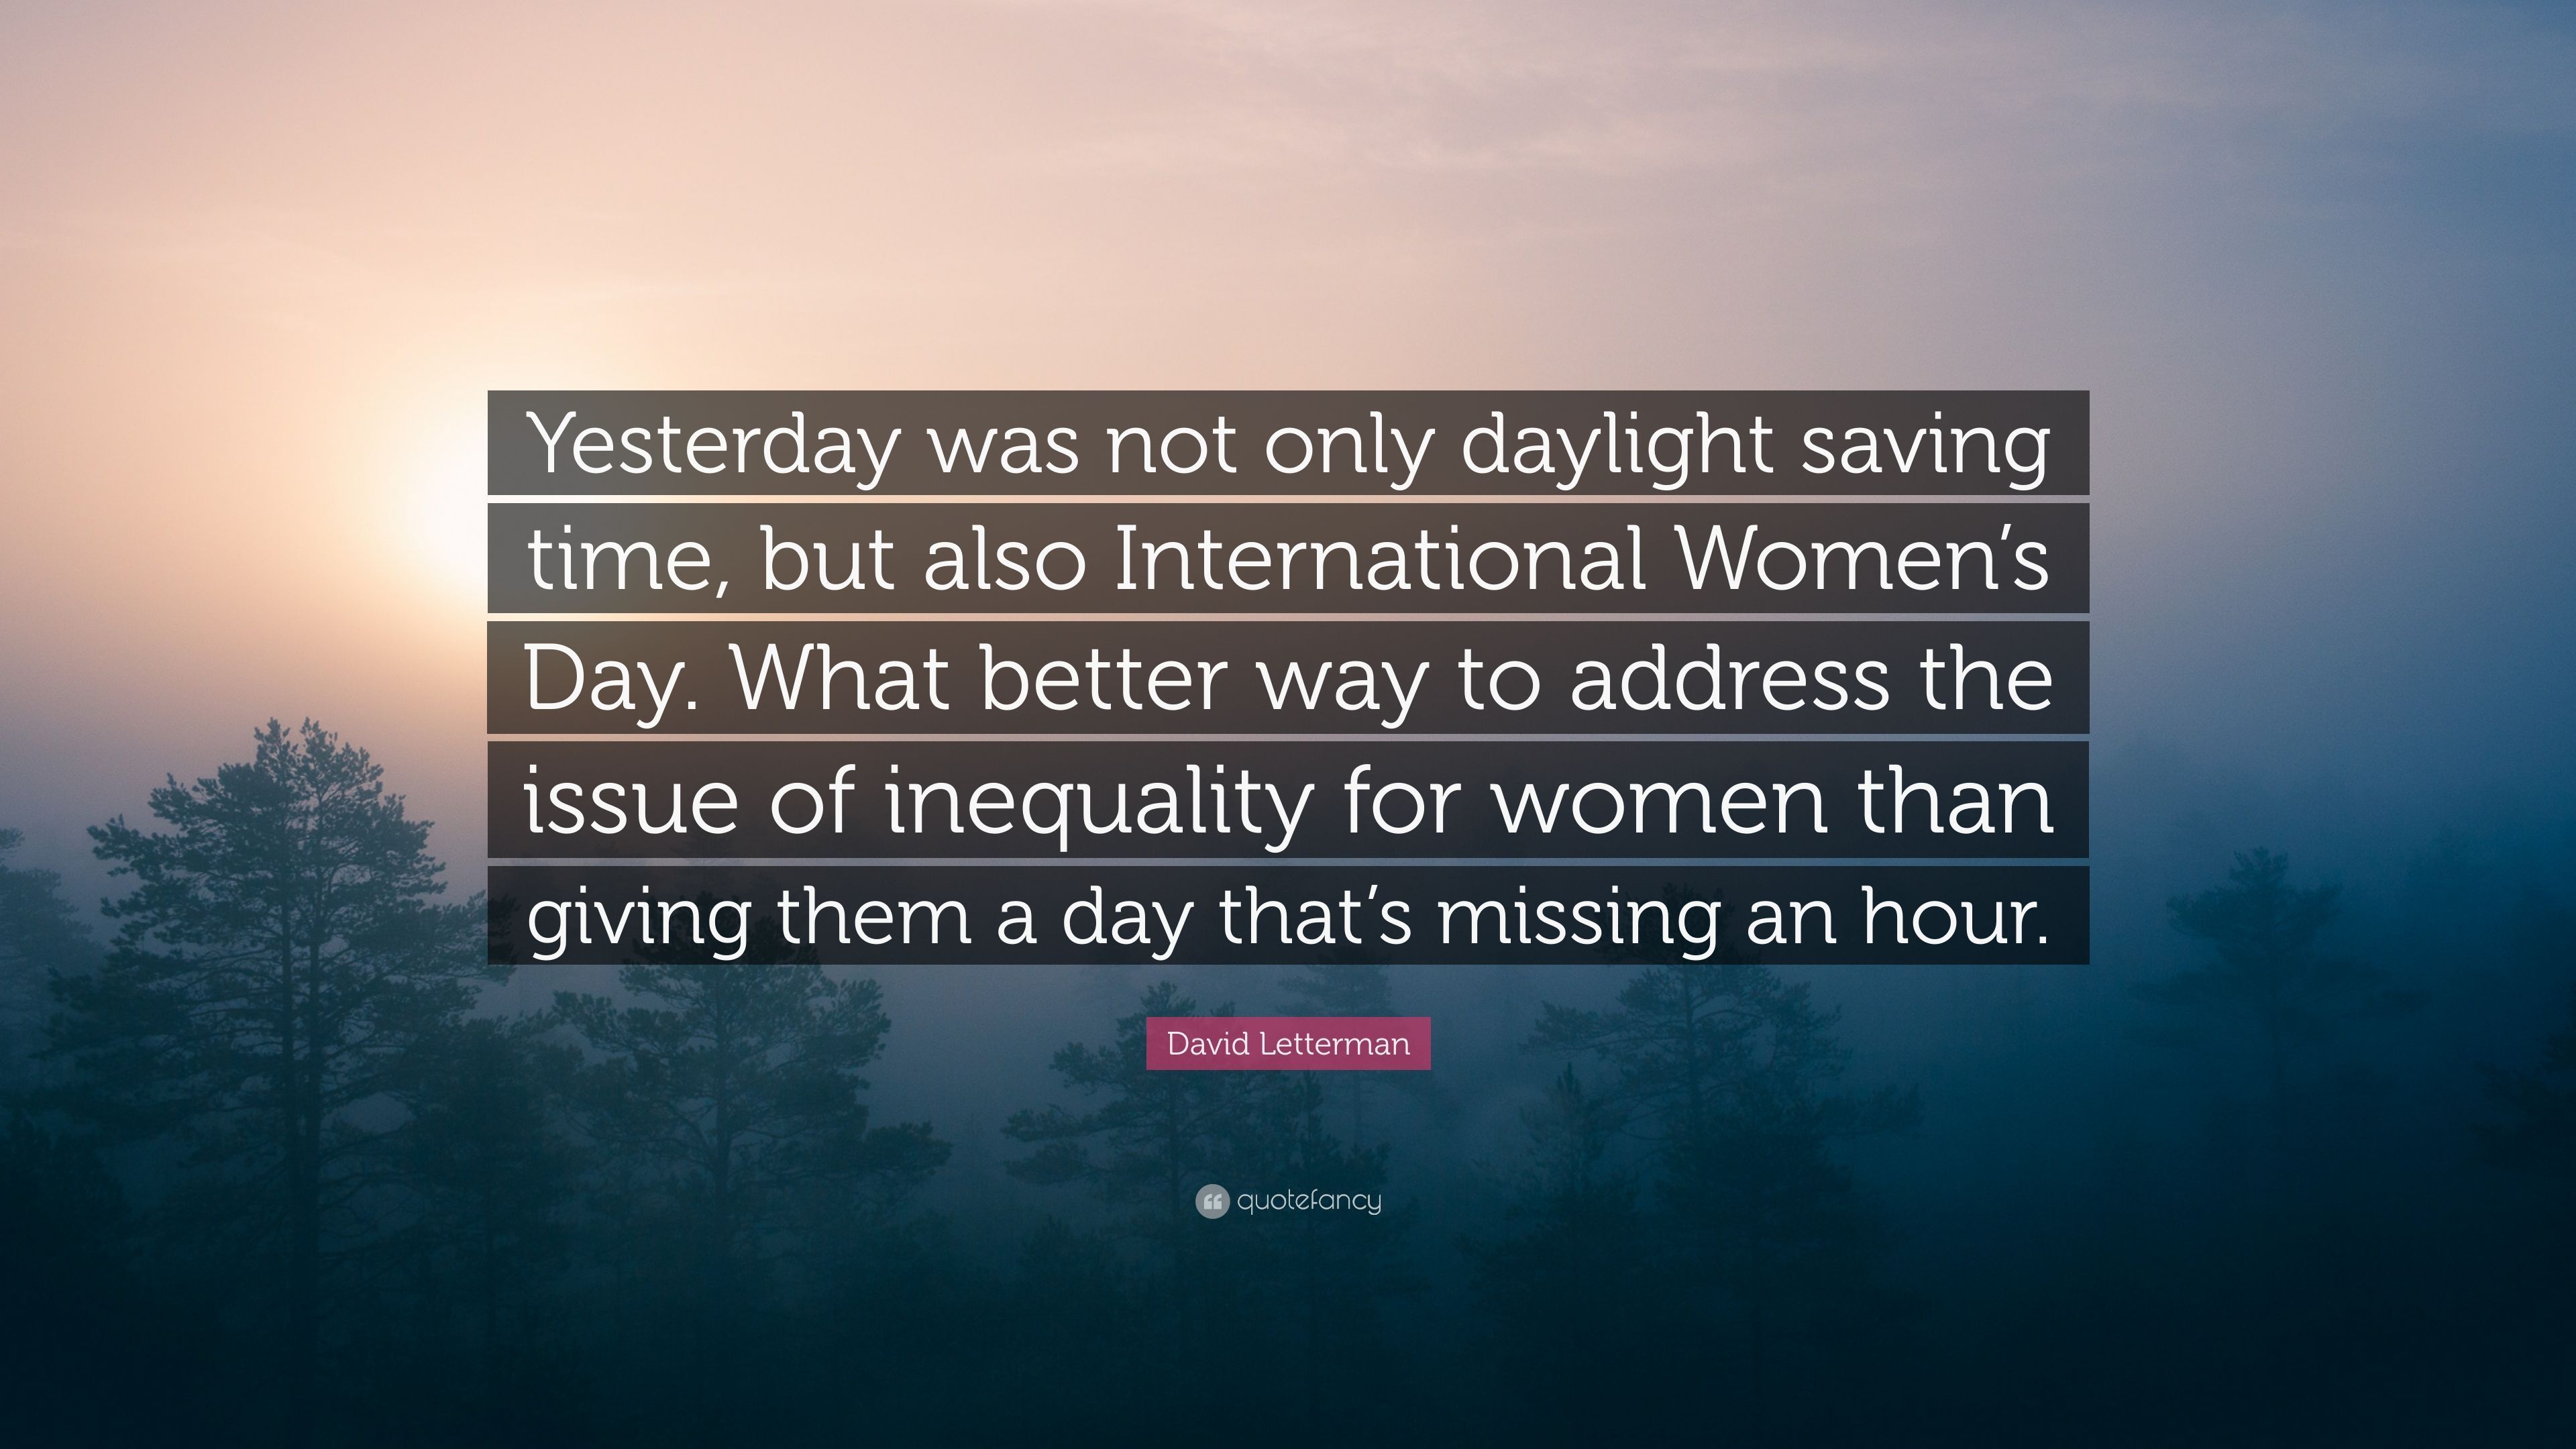 David Letterman Quote: “Yesterday was not only daylight saving